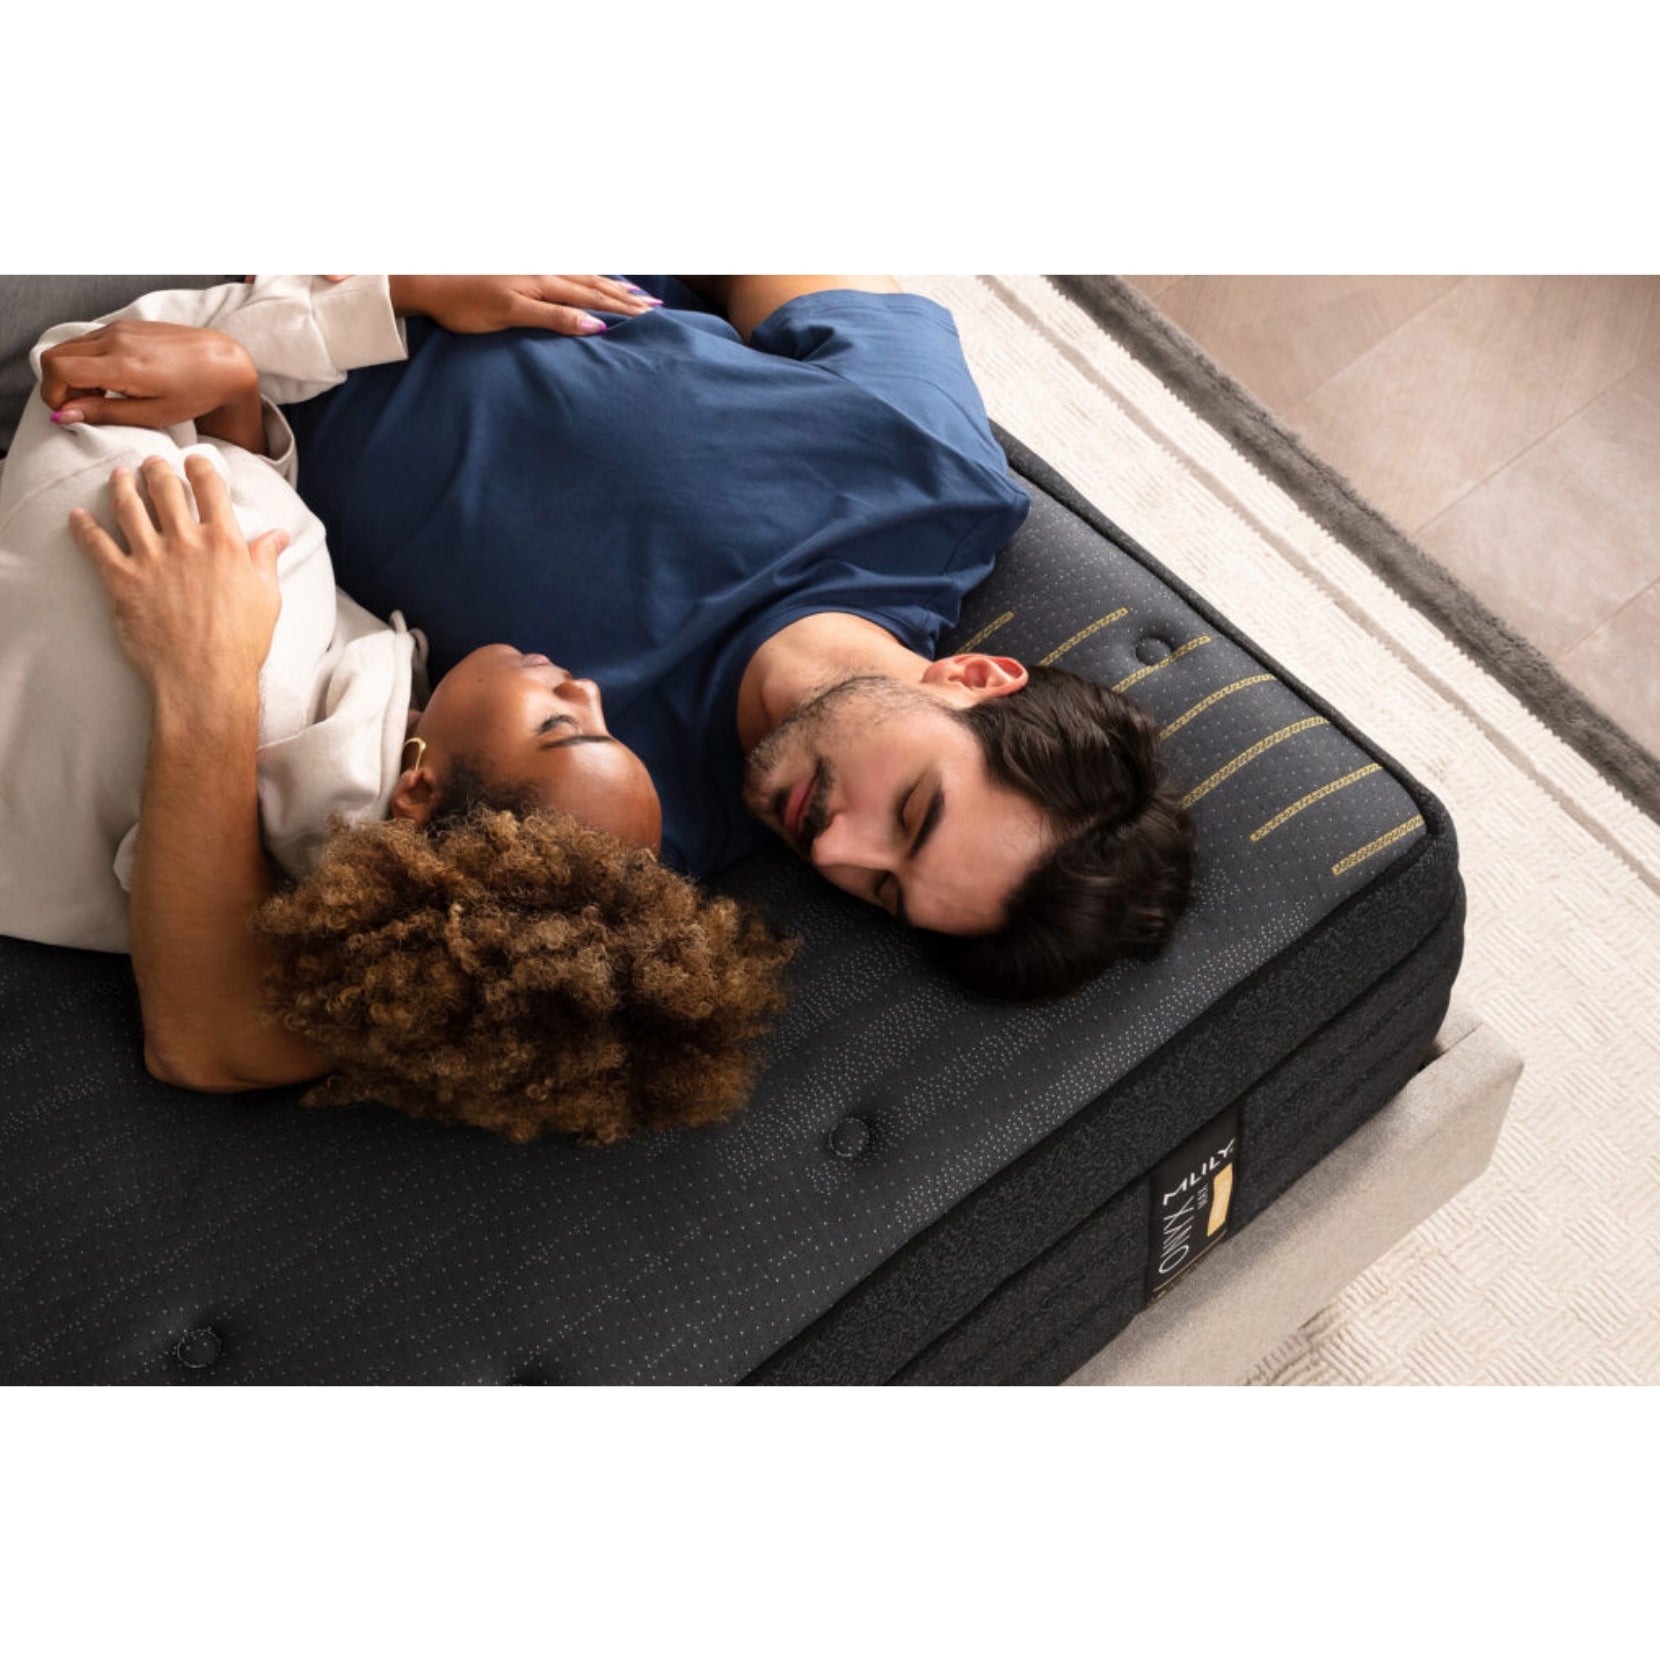 ONYX Max 14" Hybrid Mattress With Copper Infused Memory Foam, Overhead View With A Man And Woman Expressing Their Love